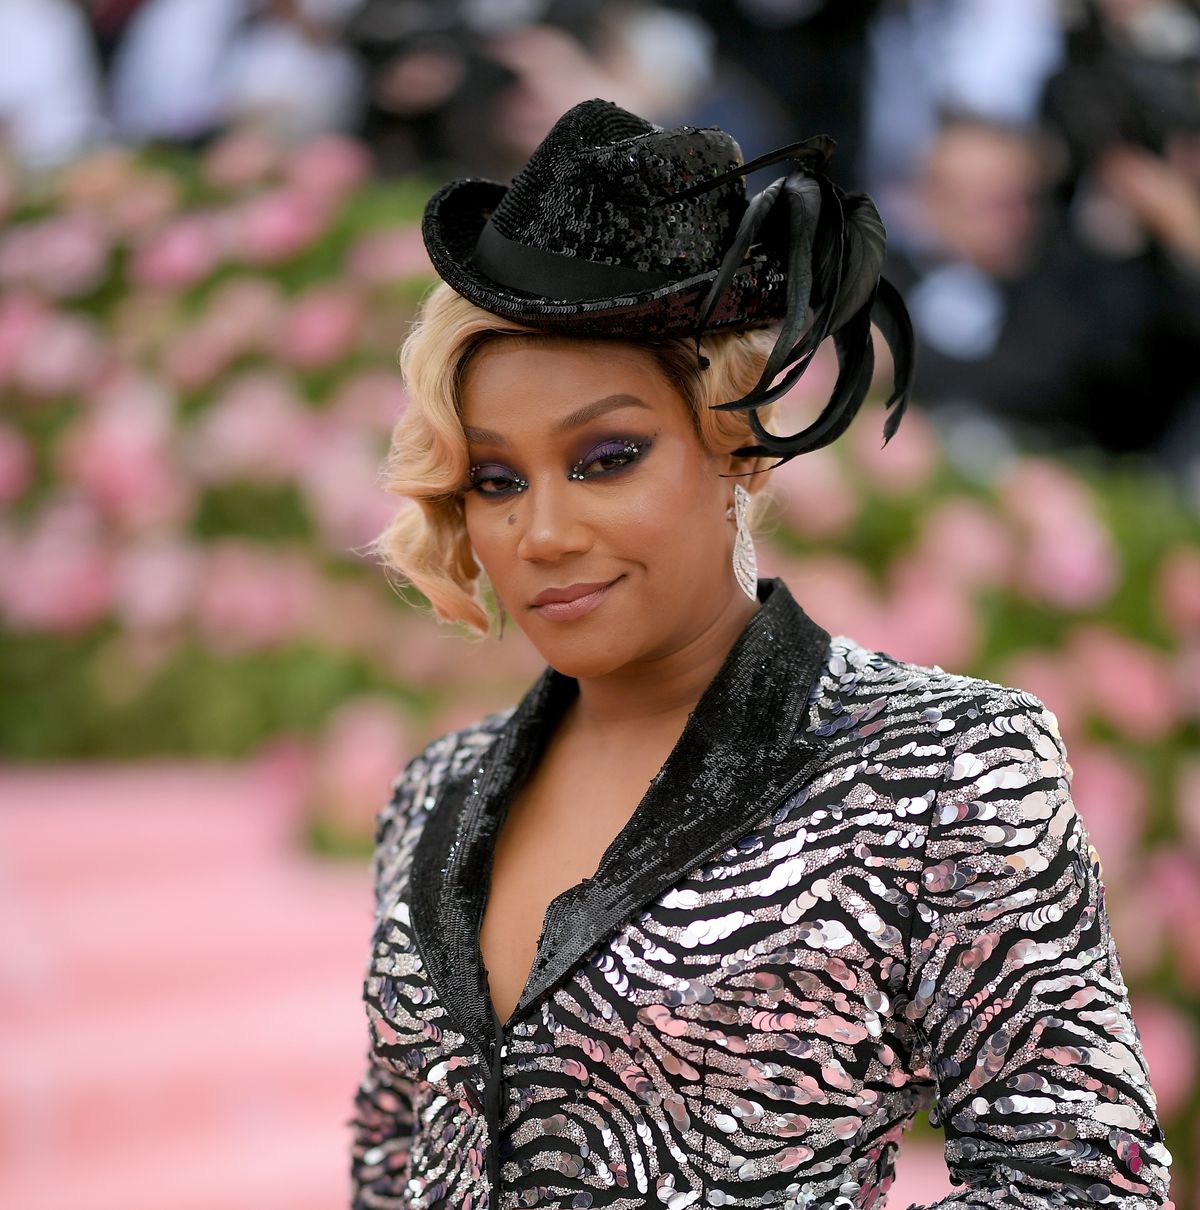 Met Gala 2019: Tiffany Haddish hides home-made fried chicken in her Michael  Kors clutch bag on red carpet, The Independent